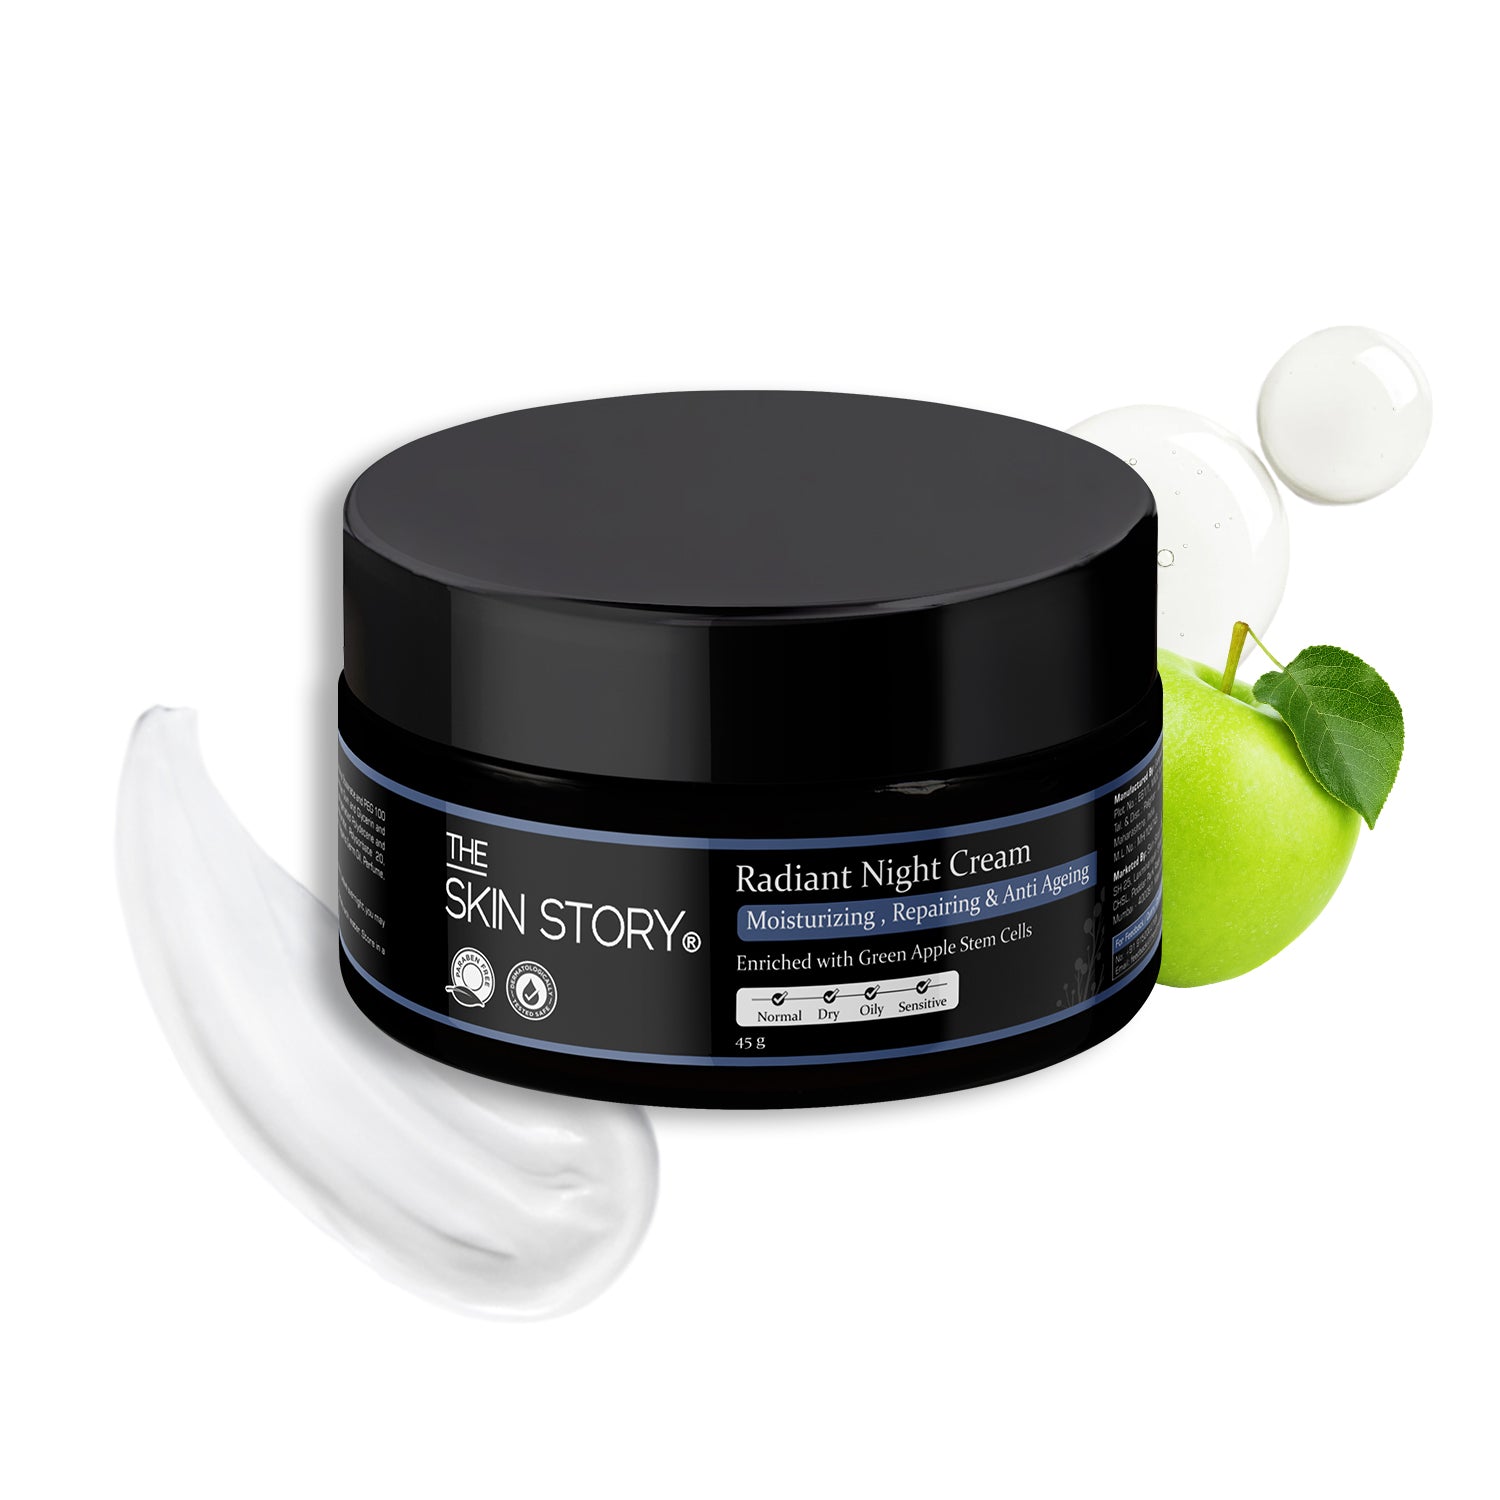 The Skin Story Anti Ageing Radiant Night Cream for Women | Night Cream for Glowing & Radiant Skin |Fights Fine Lines & Wrinkles | For Women |With Stem Cells  45g